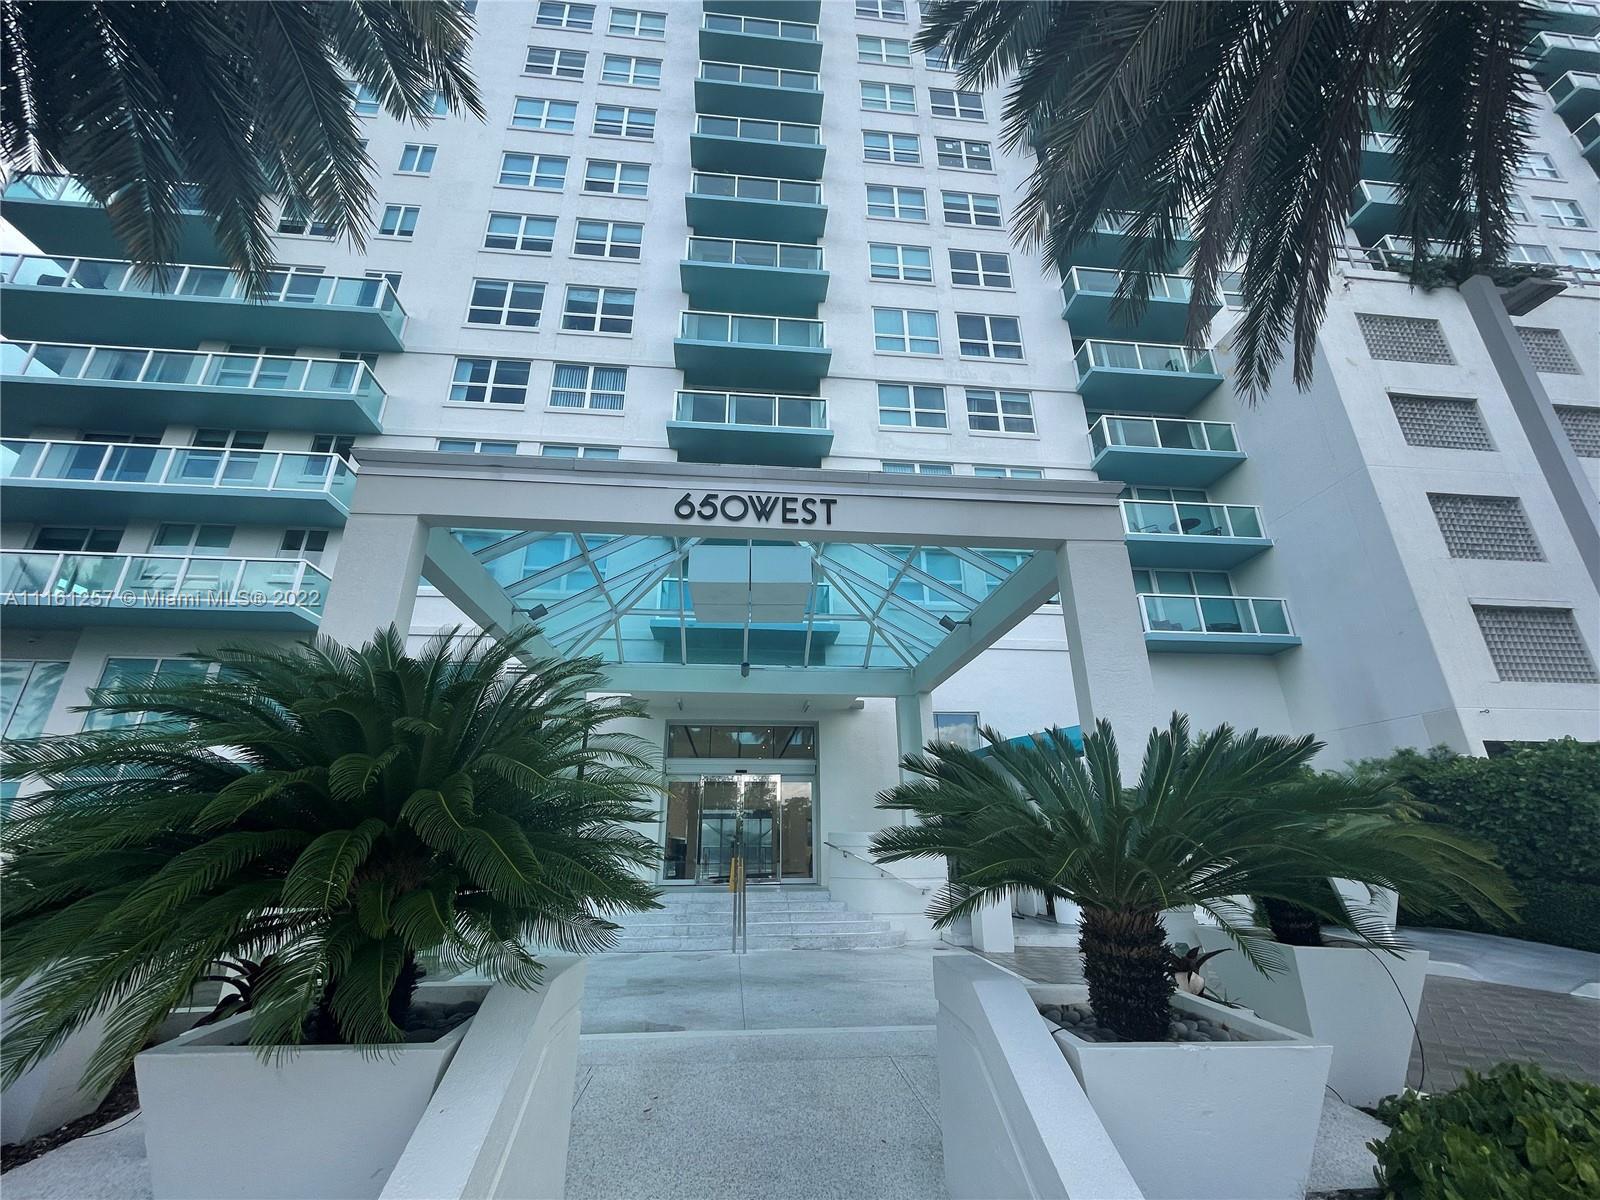 VACANT AND EASY TO SHOW. Welcome to enjoy the Floridian lifestyle with the amazing amenities of The 